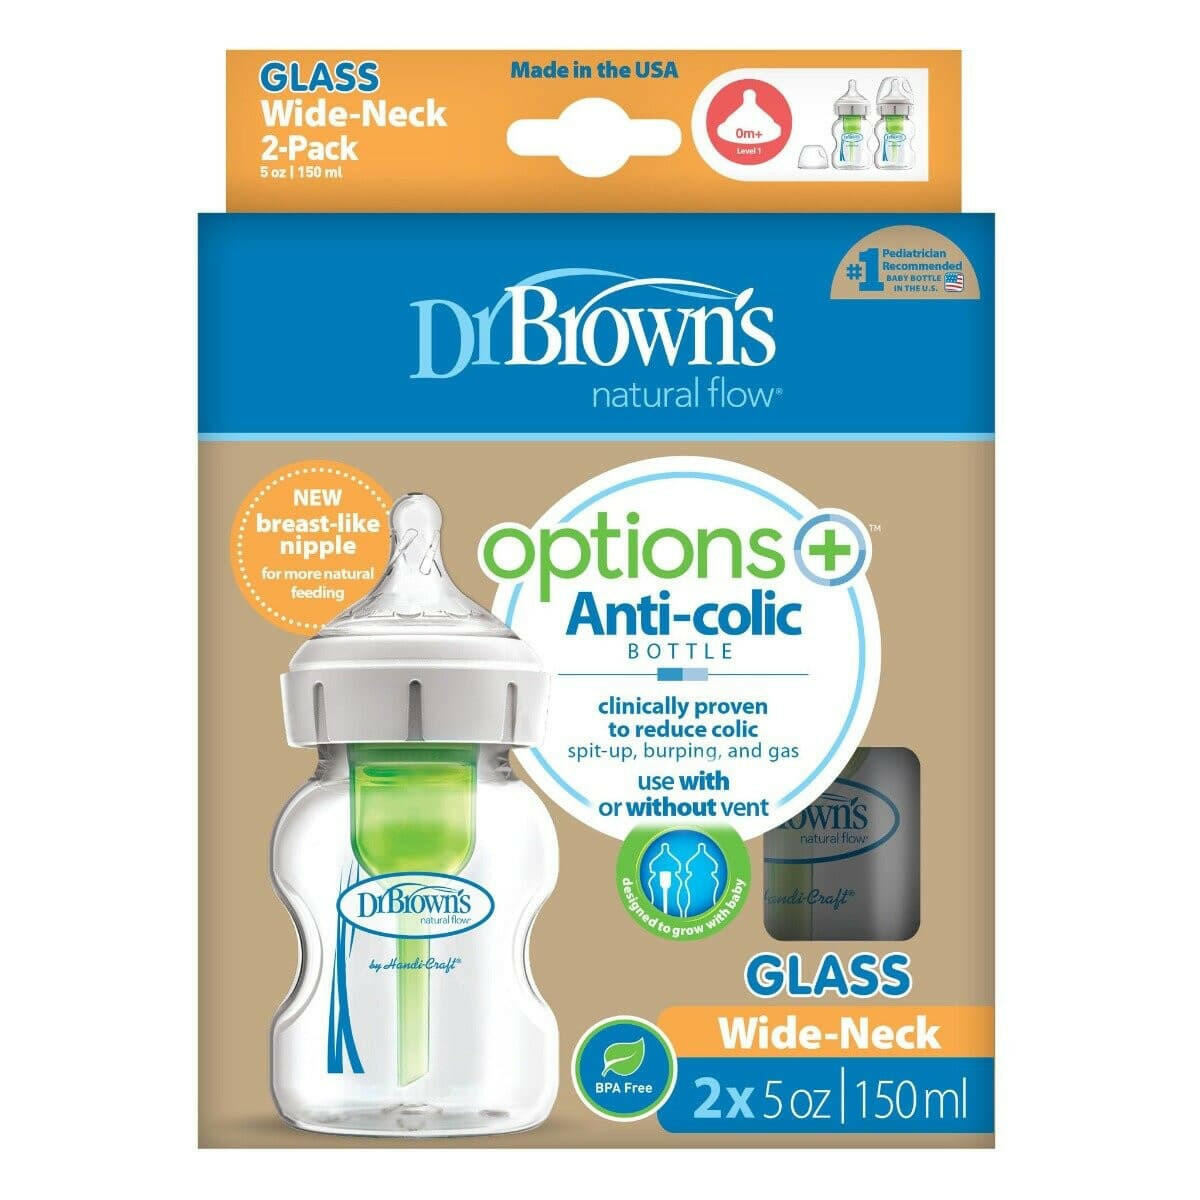 Glass Wide-Neck Baby Bottle 2 piece, Dr Browns 150ml.